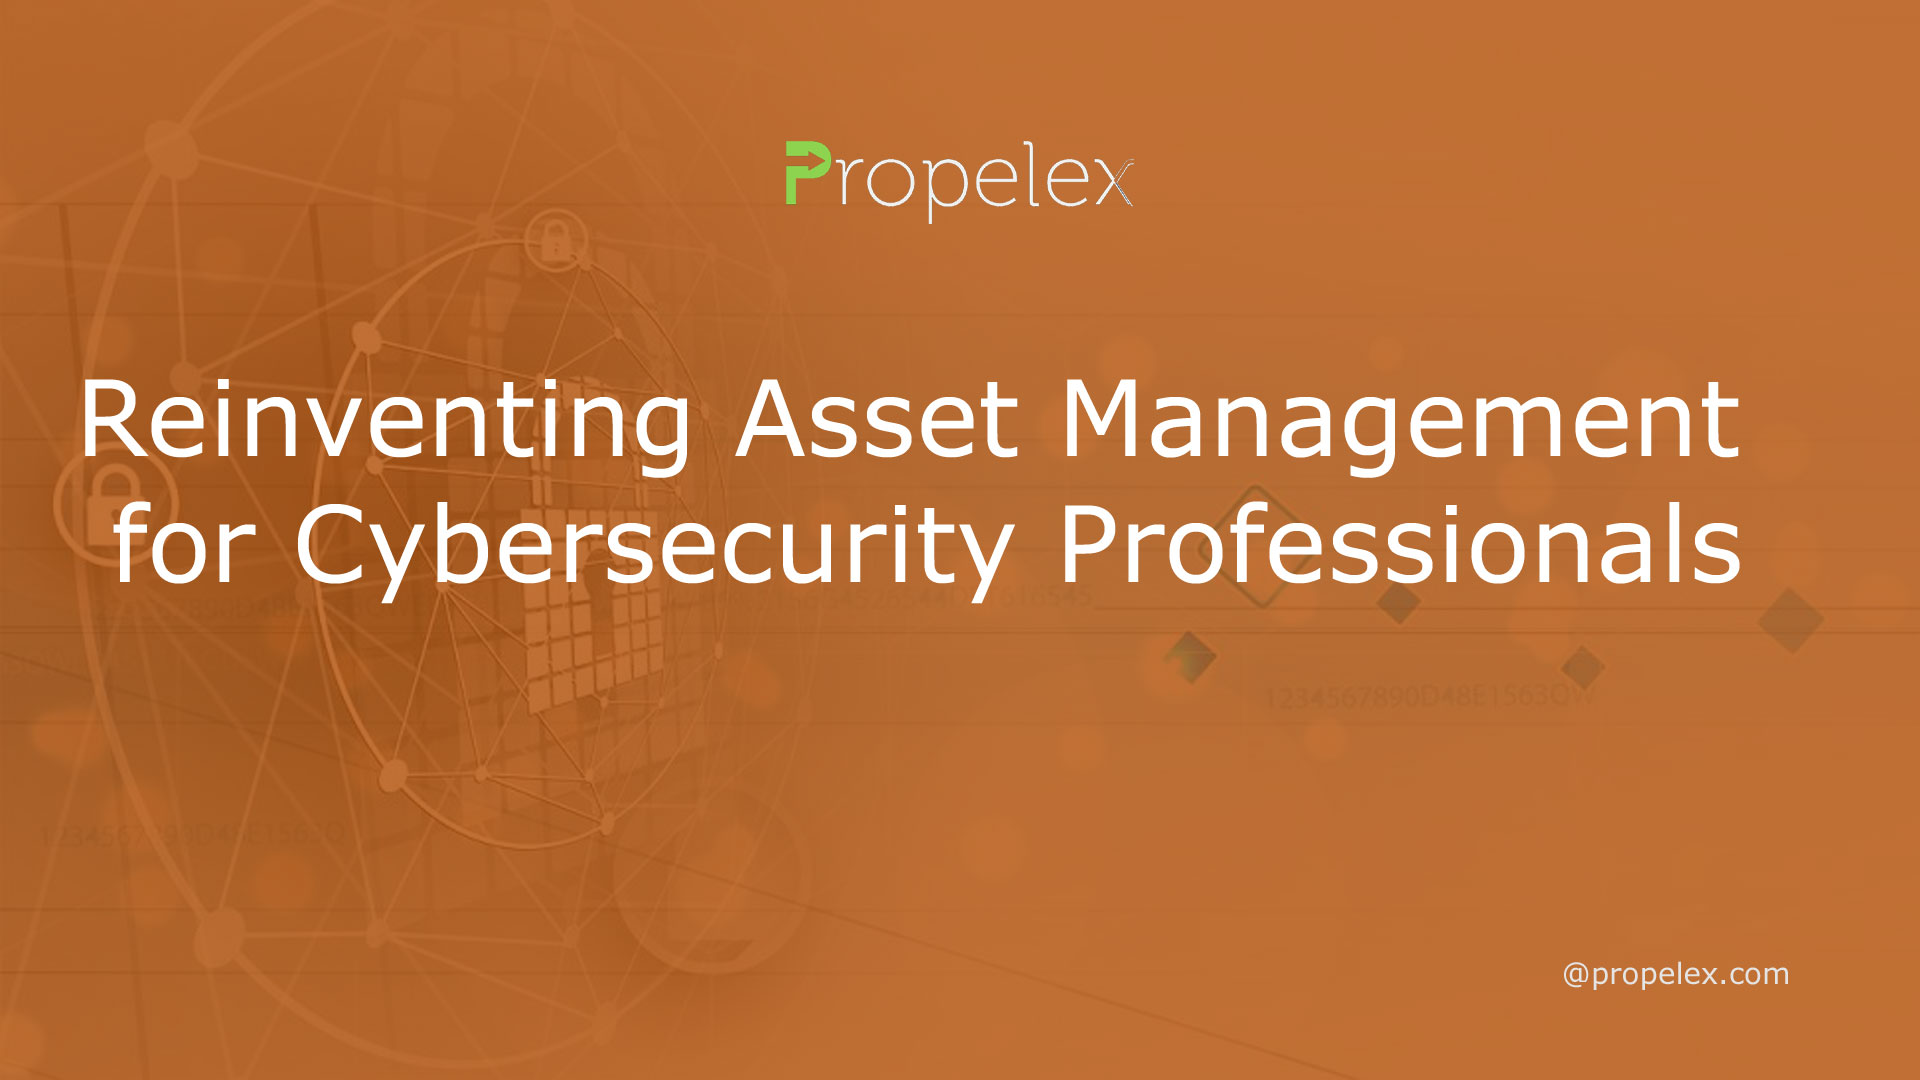 Cybersecurity asset management